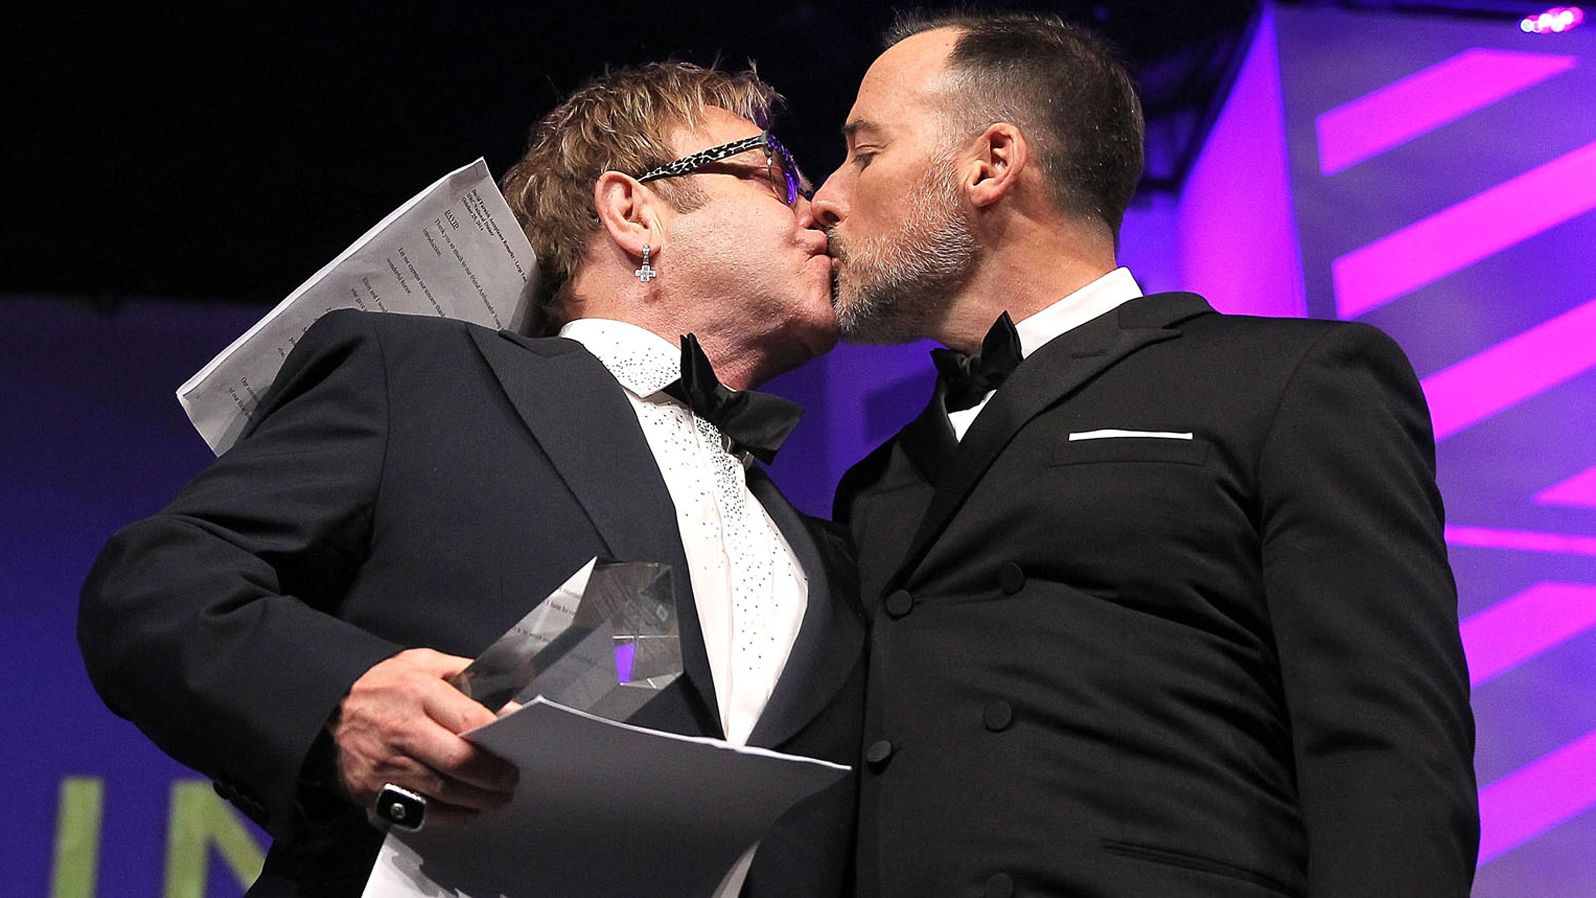 John and Furnish kiss at the Human Rights Campaign's National Dinner in 2014. They married in December of that year.